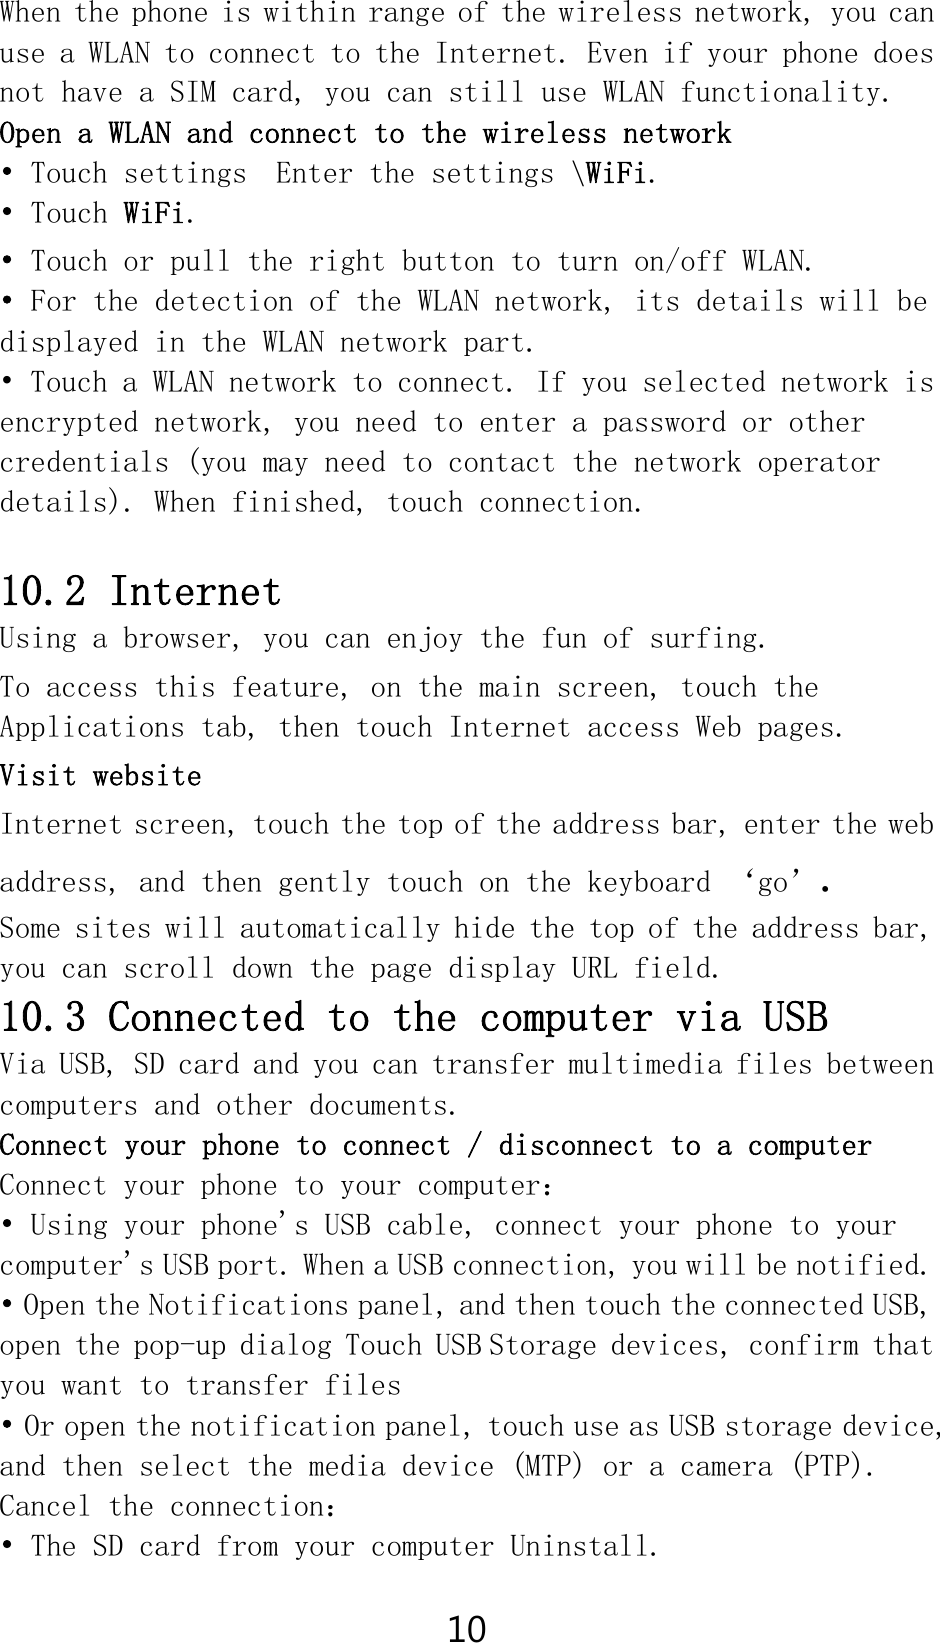 10 When the phone is within range of the wireless network, you can use a WLAN to connect to the Internet. Even if your phone does not have a SIM card, you can still use WLAN functionality. Open a WLAN and connect to the wireless network • Touch settings  Enter the settings \WiFi. • Touch WiFi. • Touch or pull the right button to turn on/off WLAN. • For the detection of the WLAN network, its details will be displayed in the WLAN network part. • Touch a WLAN network to connect. If you selected network is encrypted network, you need to enter a password or other credentials (you may need to contact the network operator details). When finished, touch connection.  10.2 Internet Using a browser, you can enjoy the fun of surfing. To access this feature, on the main screen, touch the Applications tab, then touch Internet access Web pages. Visit website Internet screen, touch the top of the address bar, enter the web address, and then gently touch on the keyboard ‘go’. Some sites will automatically hide the top of the address bar, you can scroll down the page display URL field. 10.3 Connected to the computer via USB Via USB, SD card and you can transfer multimedia files between computers and other documents. Connect your phone to connect / disconnect to a computer Connect your phone to your computer： • Using your phone&apos;s USB cable, connect your phone to your computer&apos;s USB port. When a USB connection, you will be notified. • Open the Notifications panel, and then touch the connected USB, open the pop-up dialog Touch USB Storage devices, confirm that you want to transfer files • Or open the notification panel, touch use as USB storage device, and then select the media device (MTP) or a camera (PTP). Cancel the connection： • The SD card from your computer Uninstall. 